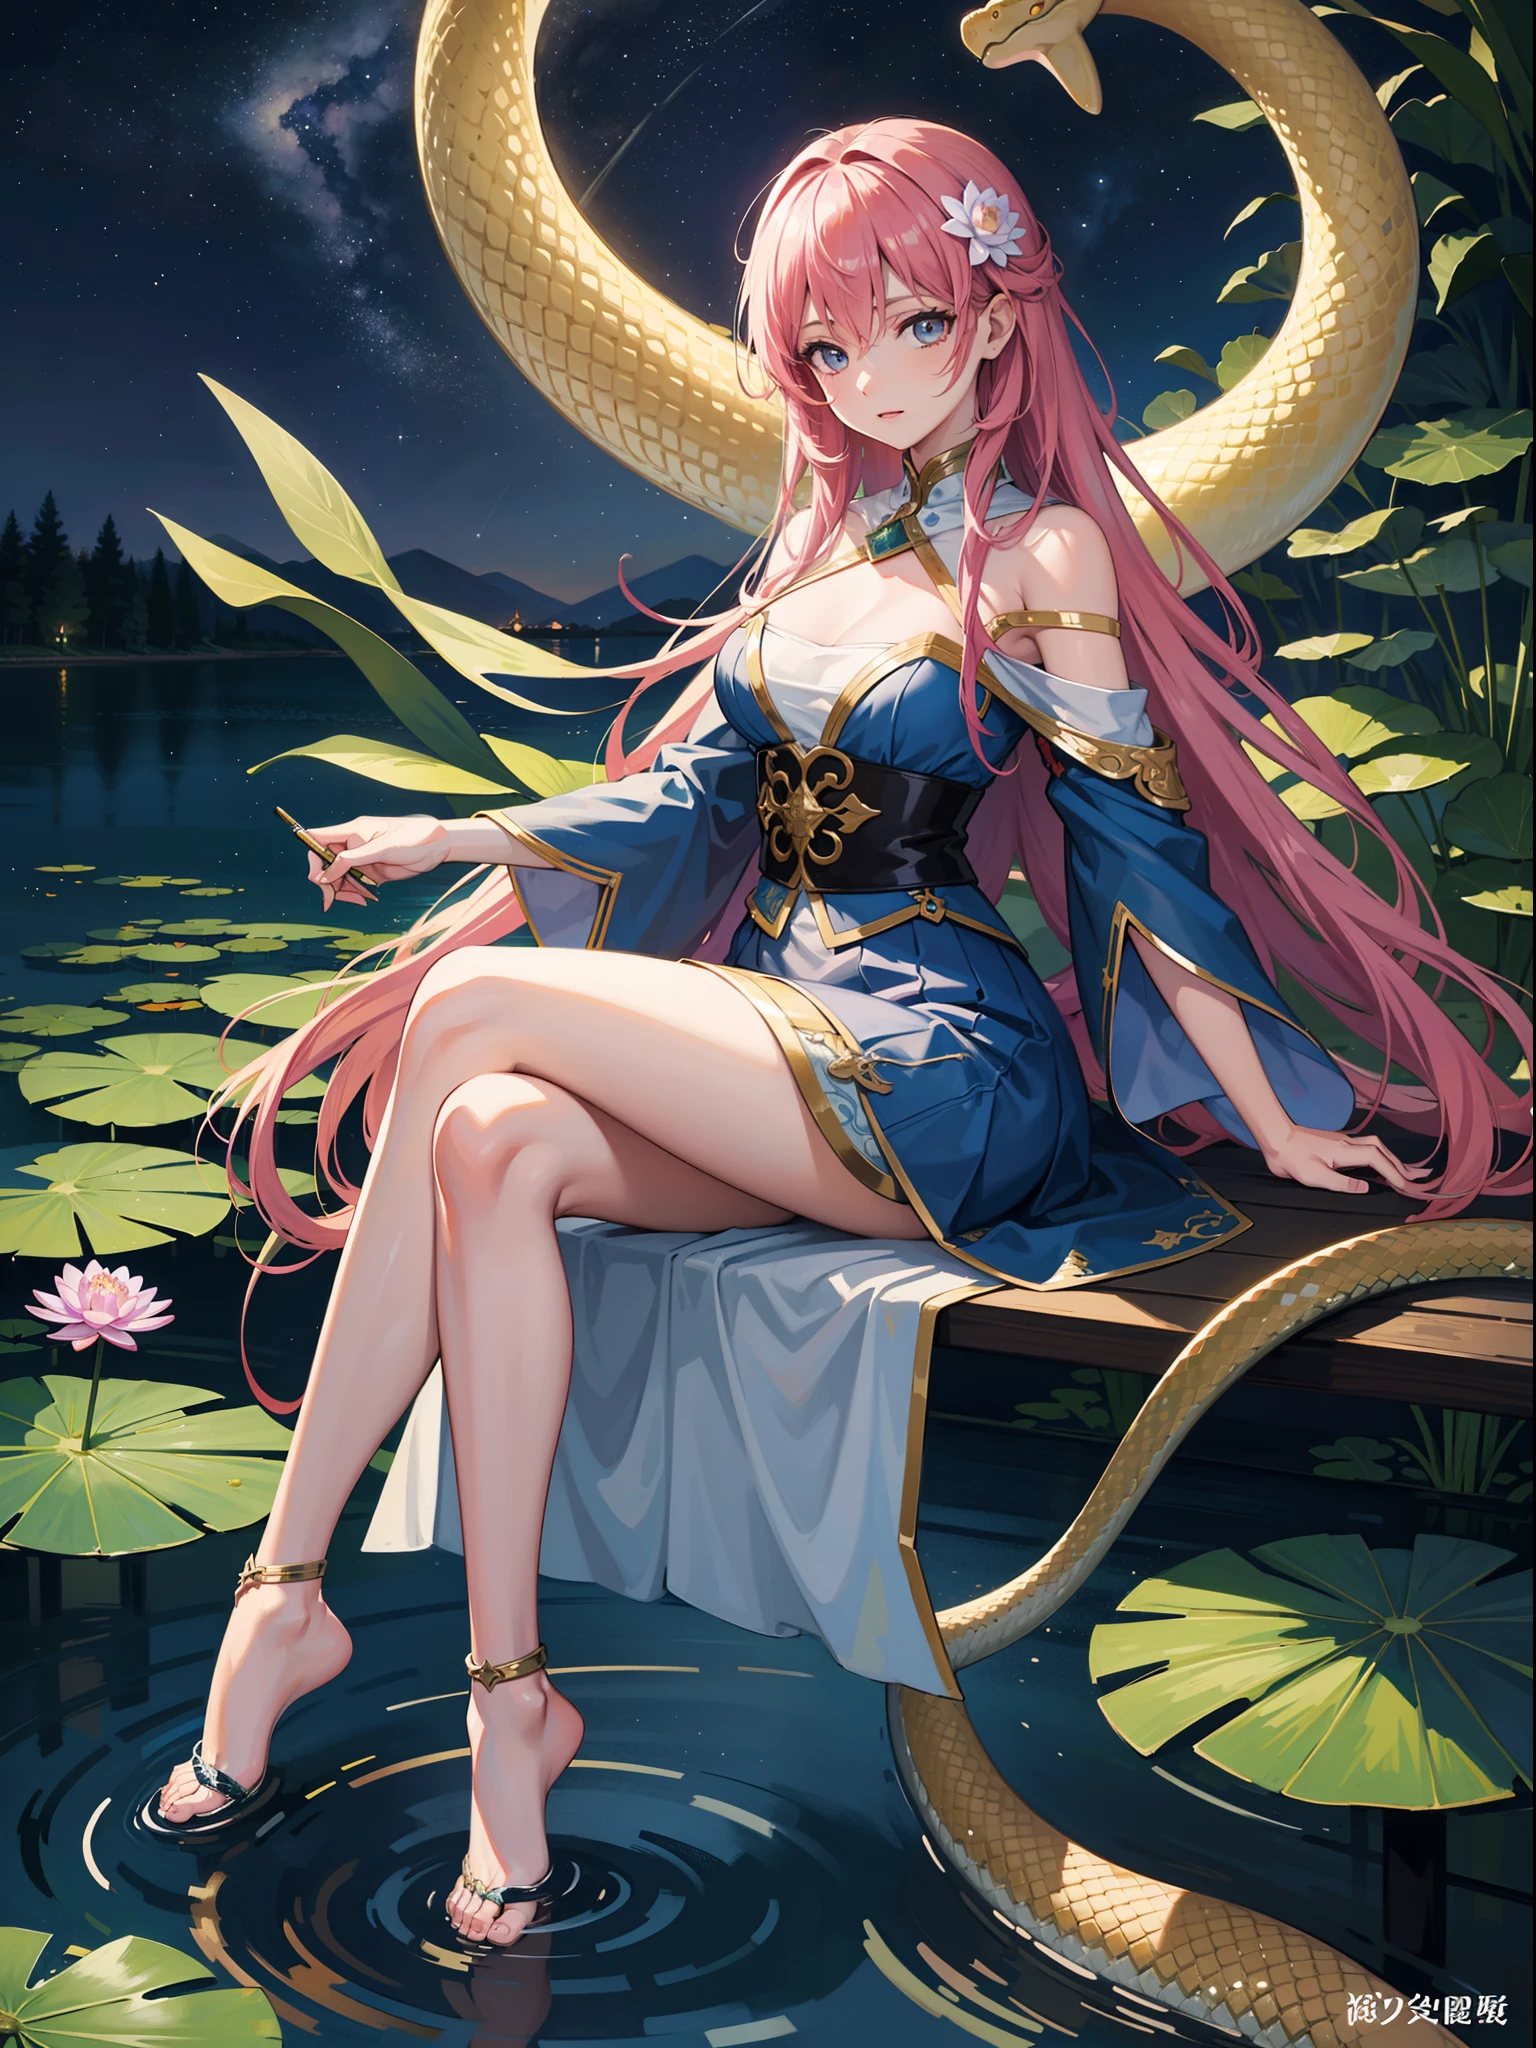 Colored line art night quiet starry sky and lake water, water lily, Bridge, Very realistic and detailed painting, Pencil, Colored pencils,８Giant snake with beautiful female body、Brilliant Hydra、Legendary Serpent Dragon、It's beautiful８Man Woman、